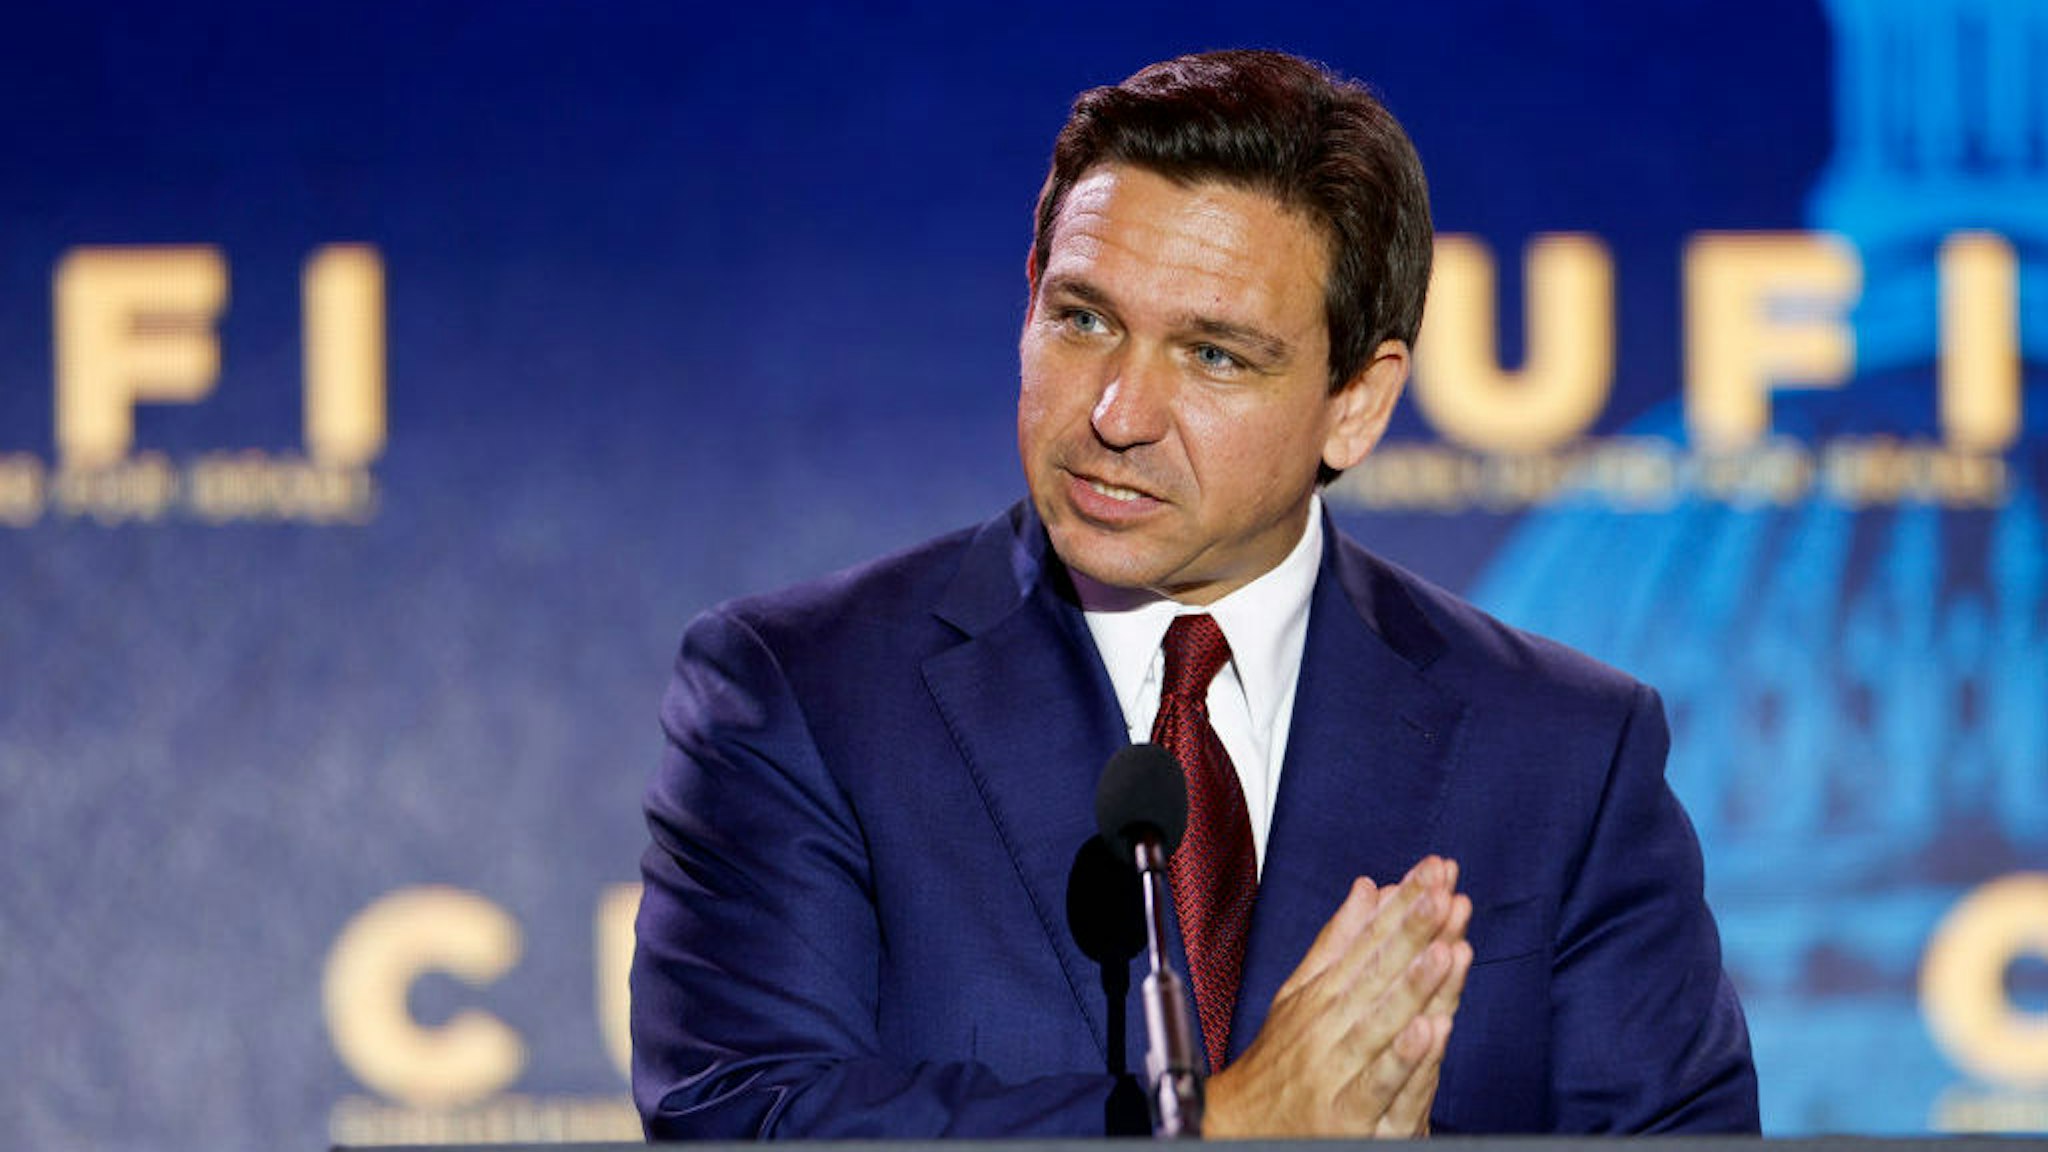 ARLINGTON, VIRGINIA - JULY 17: Republican presidential candidate Florida Governor Ron DeSantis delivers remarks at the 2023 Christians United for Israel summit on July 17, 2023 in Arlington, Virginia. For this year's summit, CUFI hosts 2024 Republican presidential candidates hopefuls to speak amidst other pro-Israel activists. (Photo by Anna Moneymaker/Getty Images)